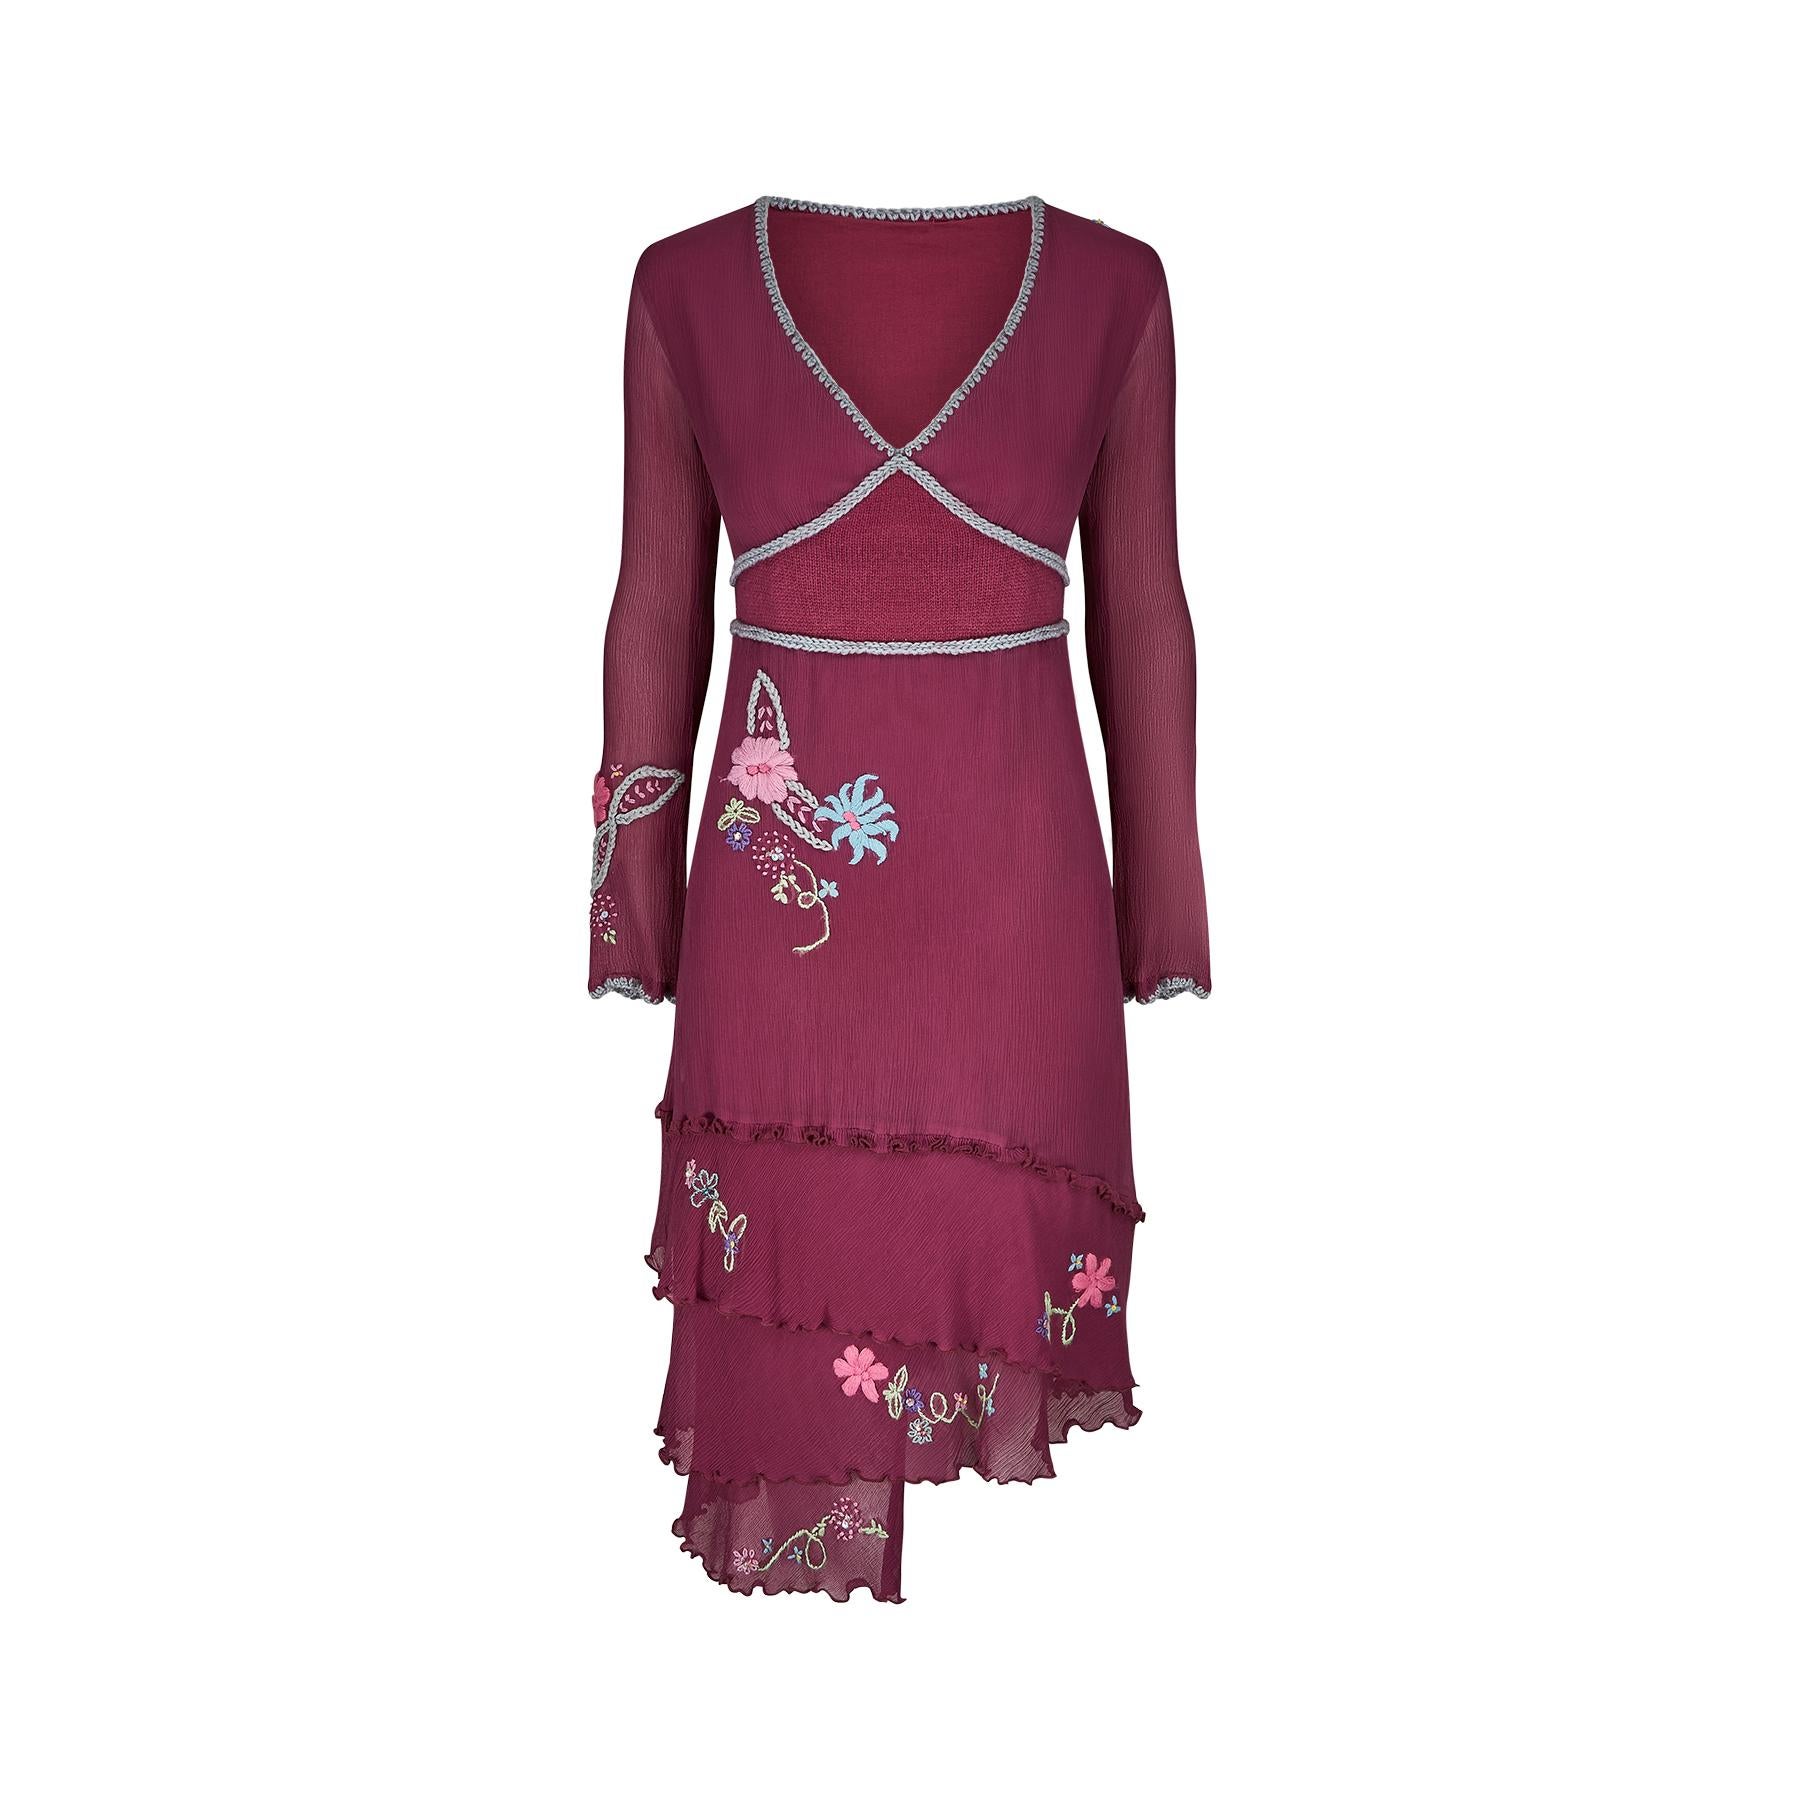 This is a very quirky and interesting premier boutique dress purchased by our client for a boho themed wedding in 2000. The main material is silk crepe in a pink - purple shade which is then embellished with knitted pastel coloured floral motifs and